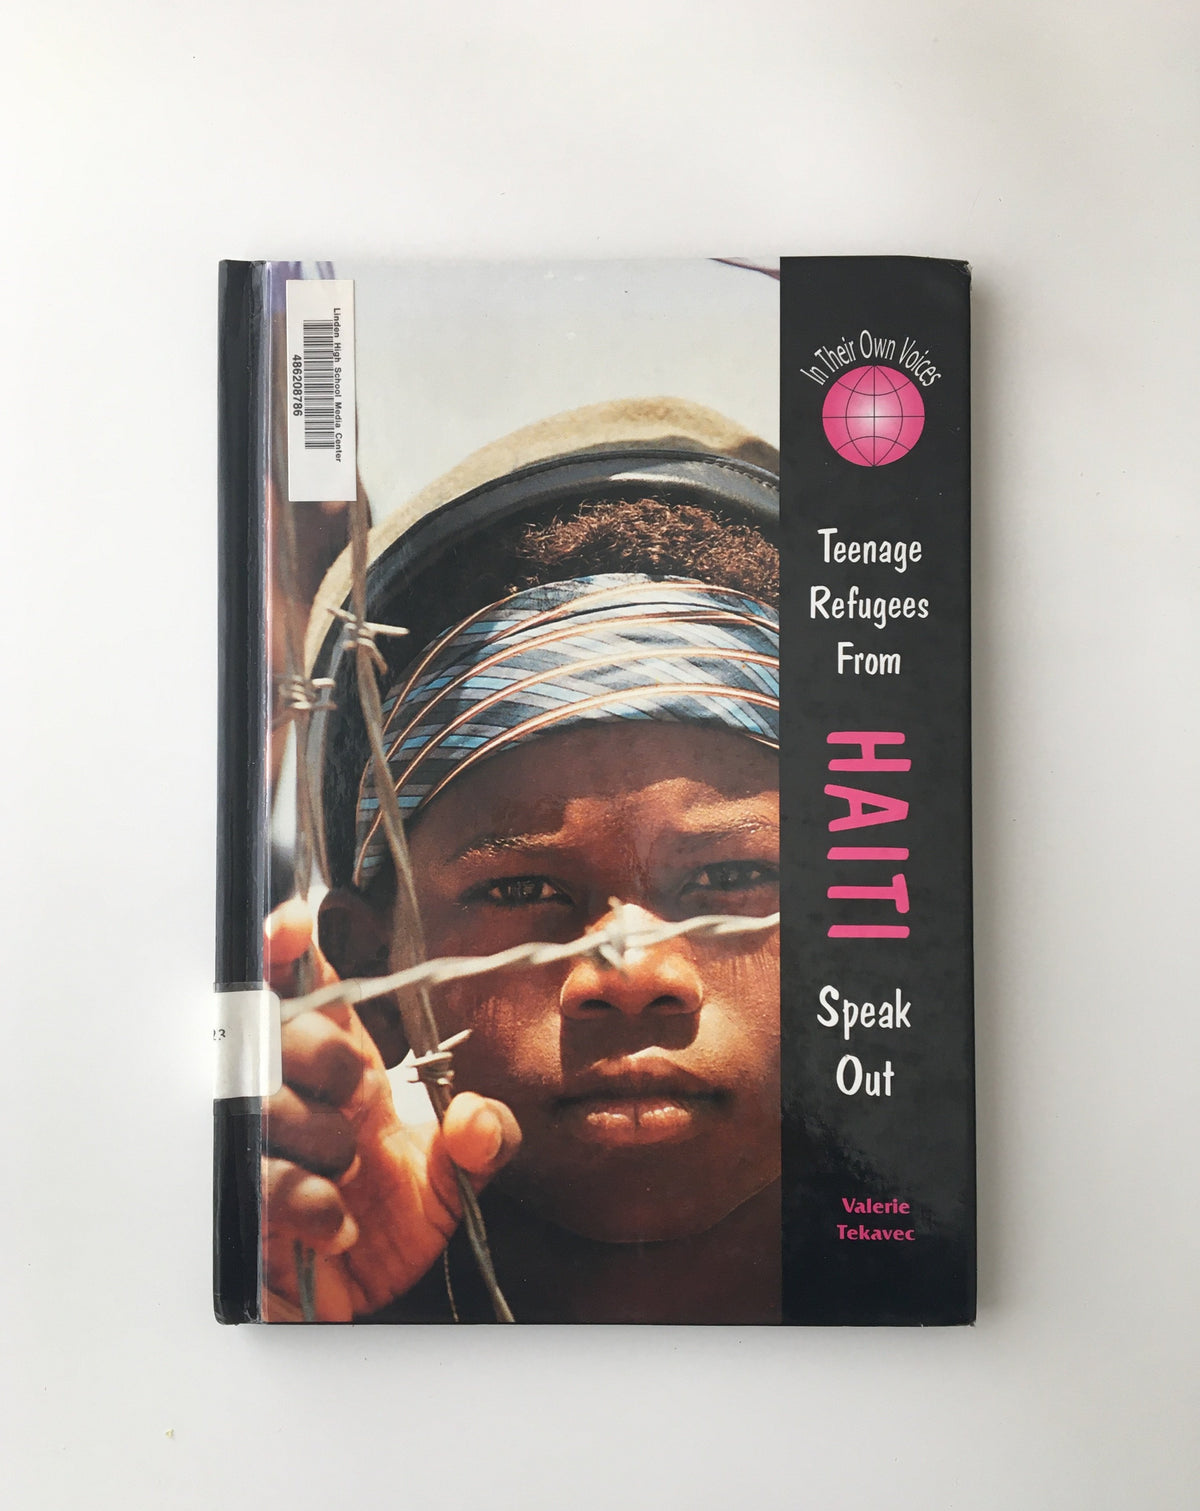 Teenage Refugees from Haiti Speak Out edited by Valerie Tekavec